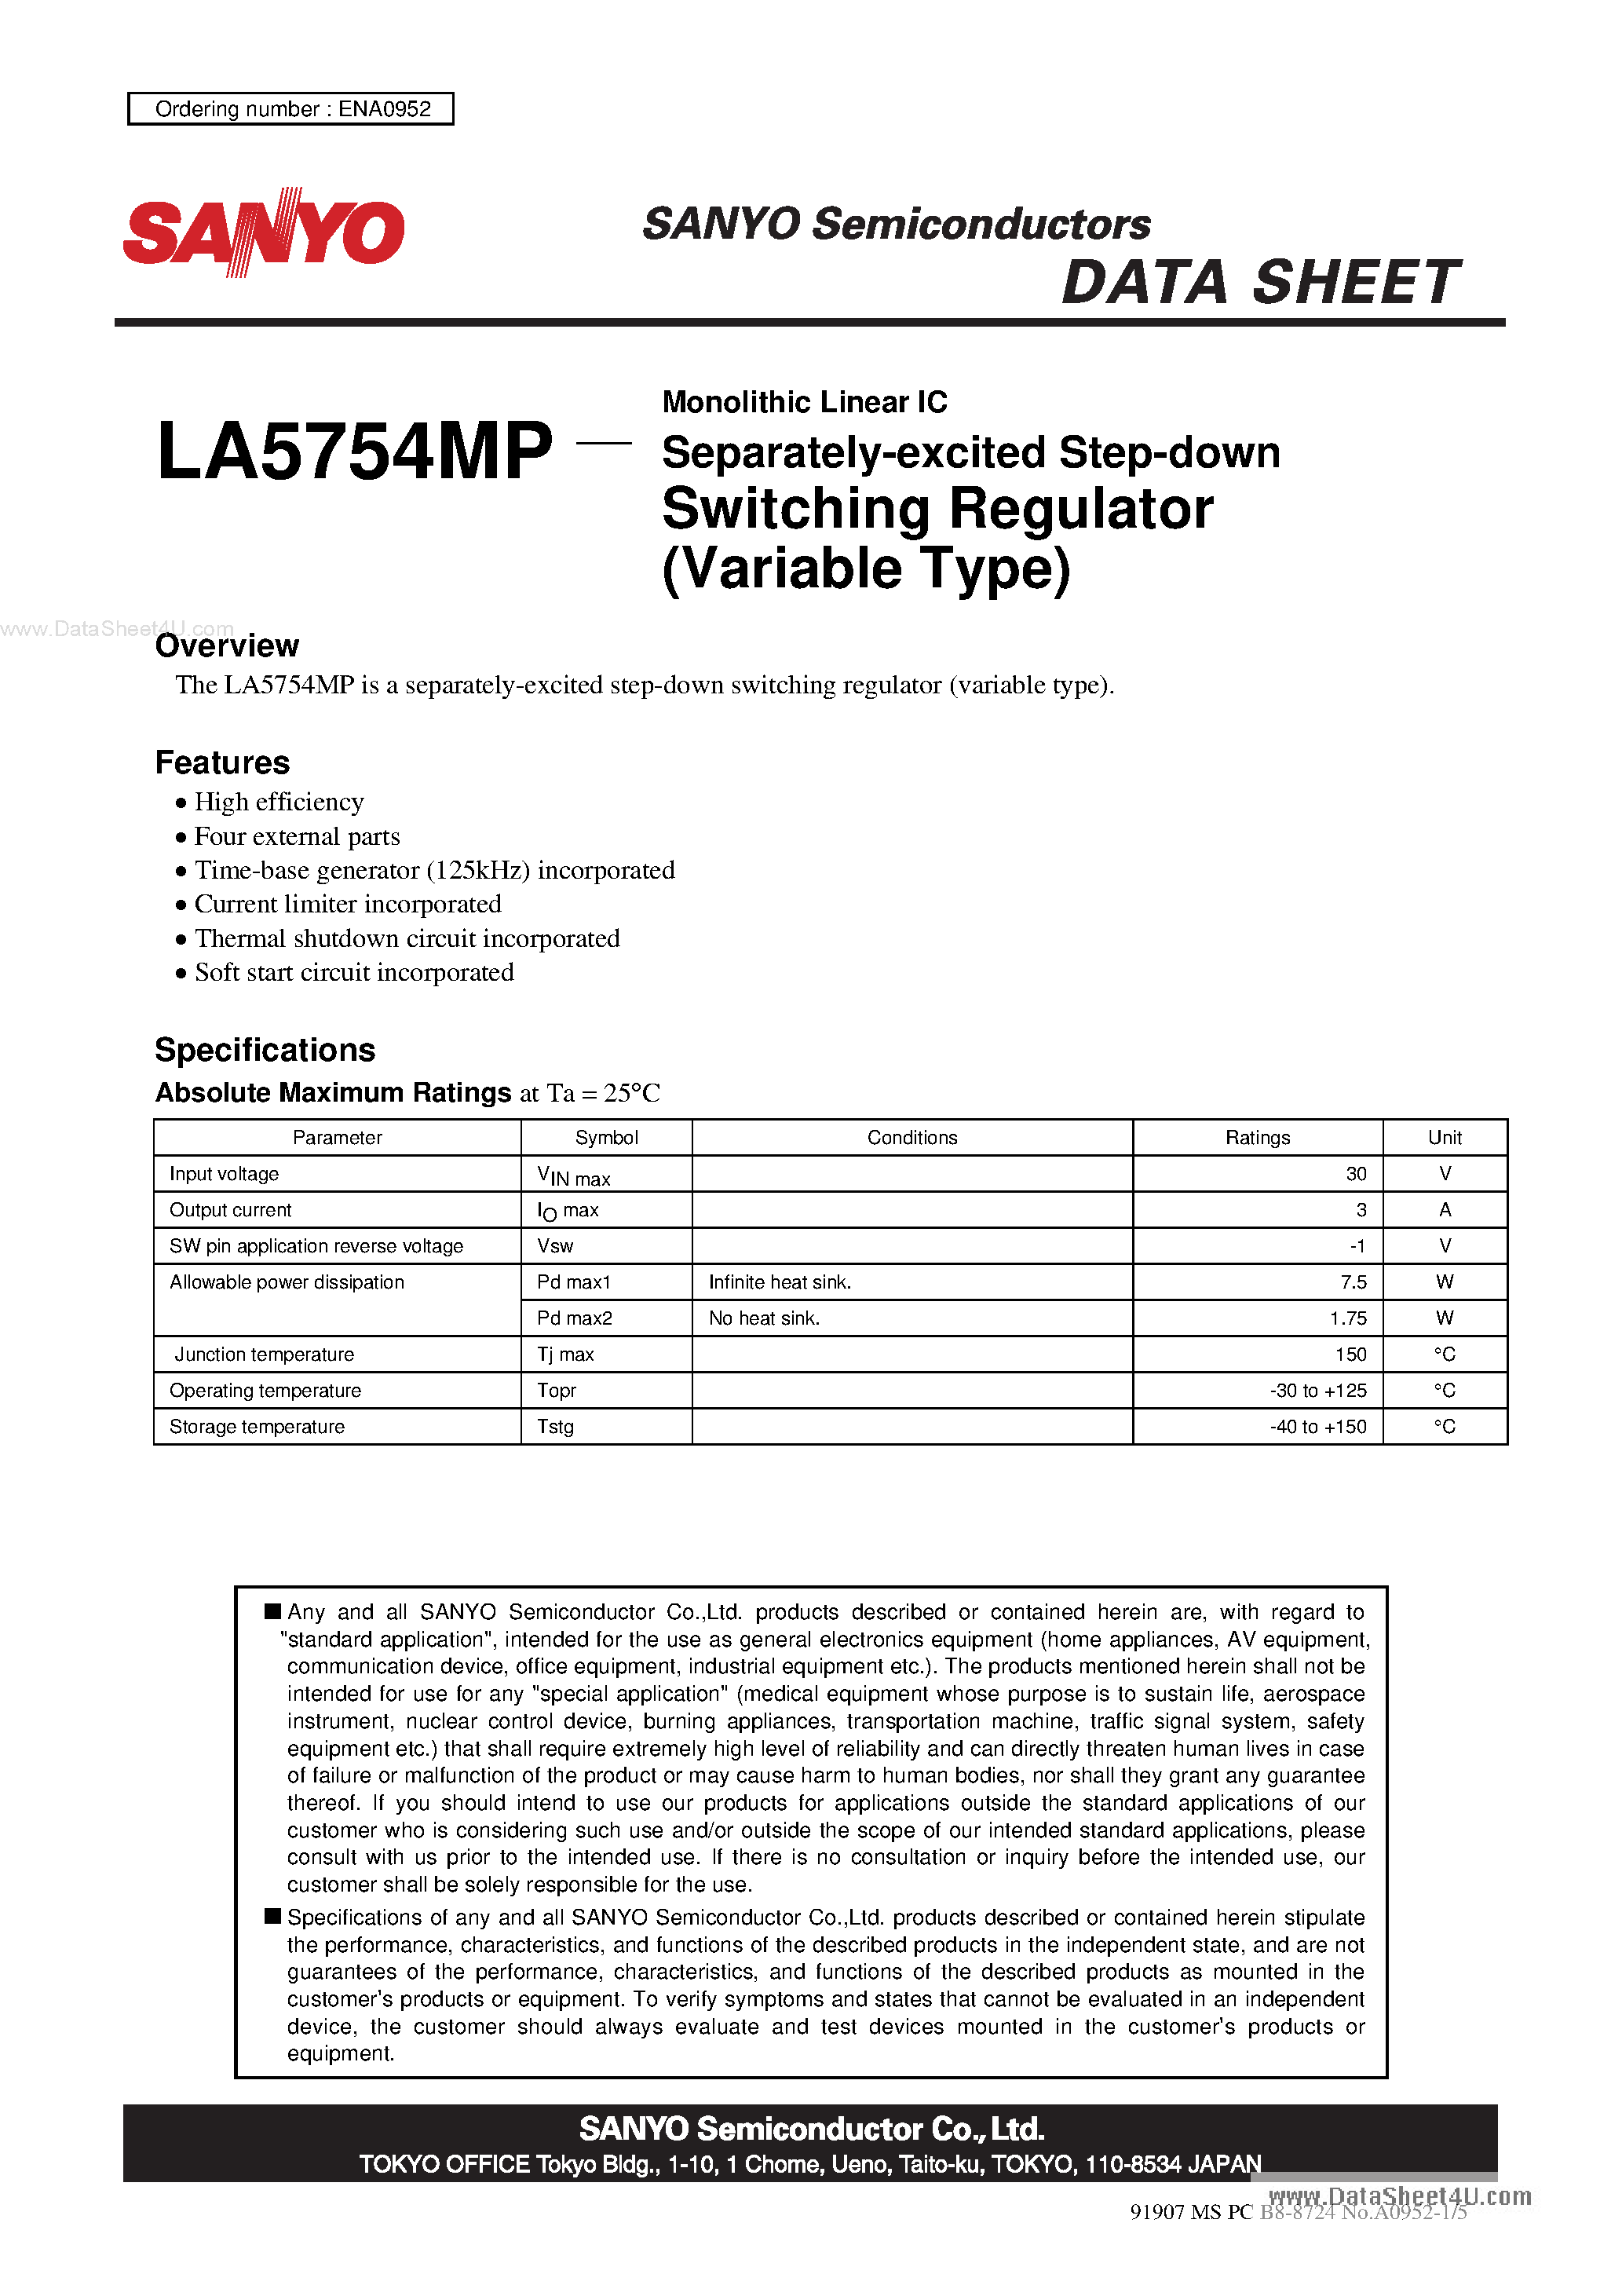 Даташит LA5754MP-Monolithic Linear IC Separately-Excited Step-Down Switching Regulator страница 1